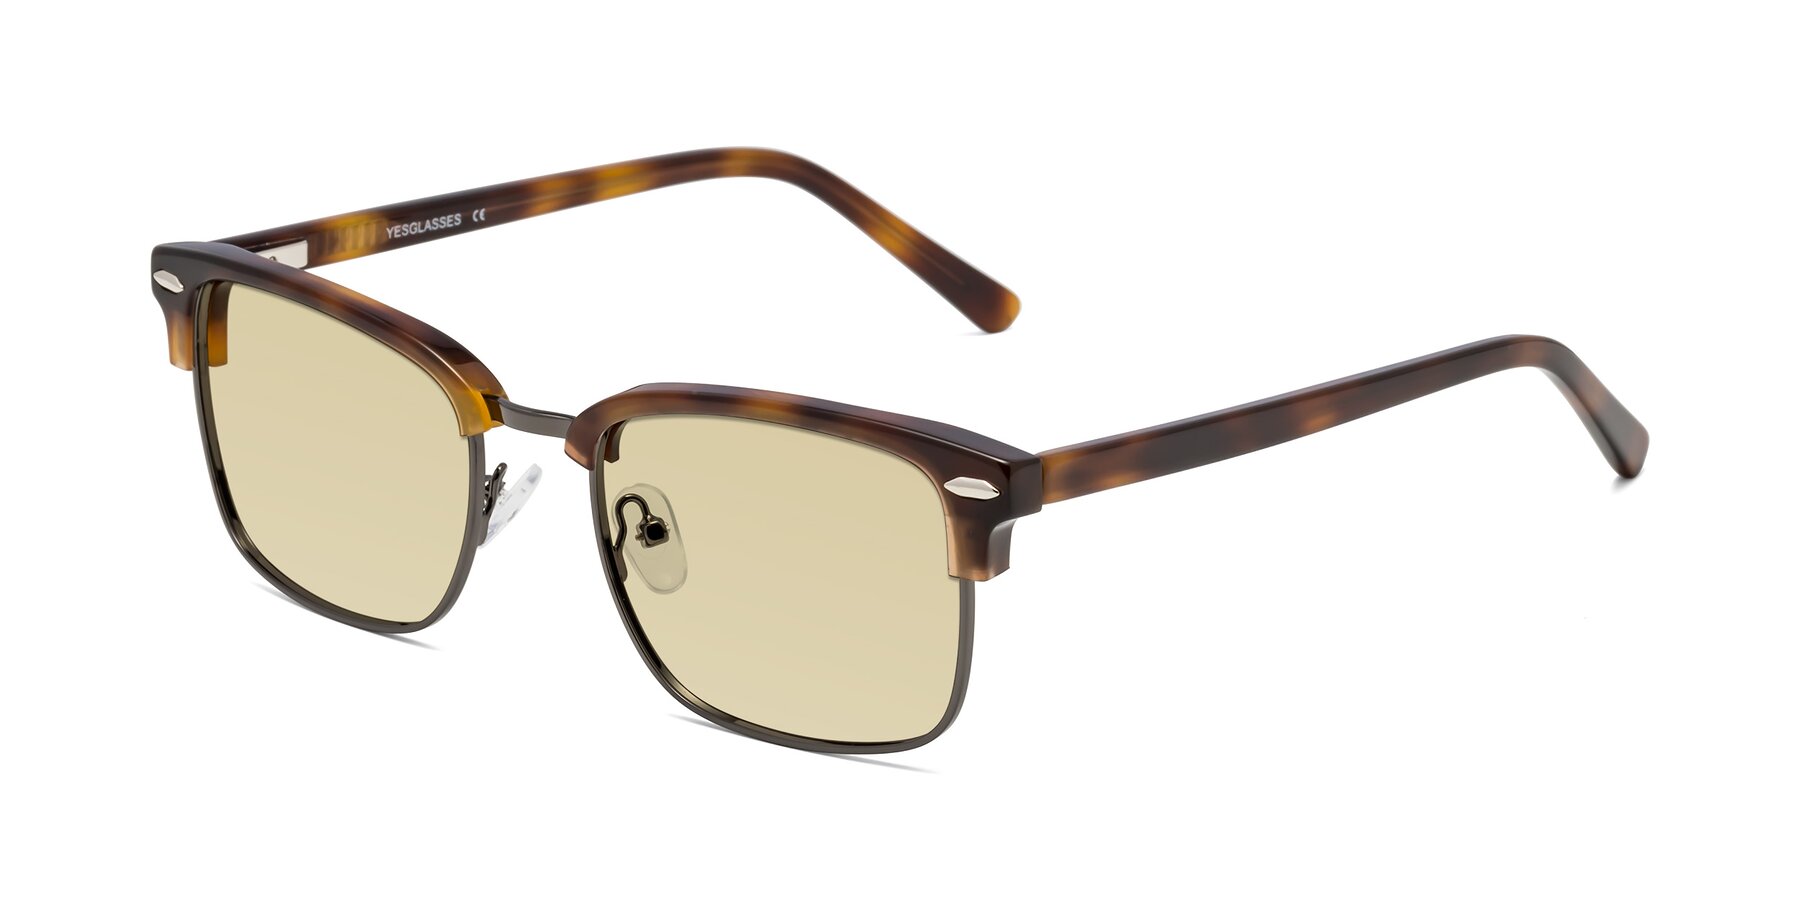 Angle of 17464 in Tortoise/ Gunmetal with Light Champagne Tinted Lenses